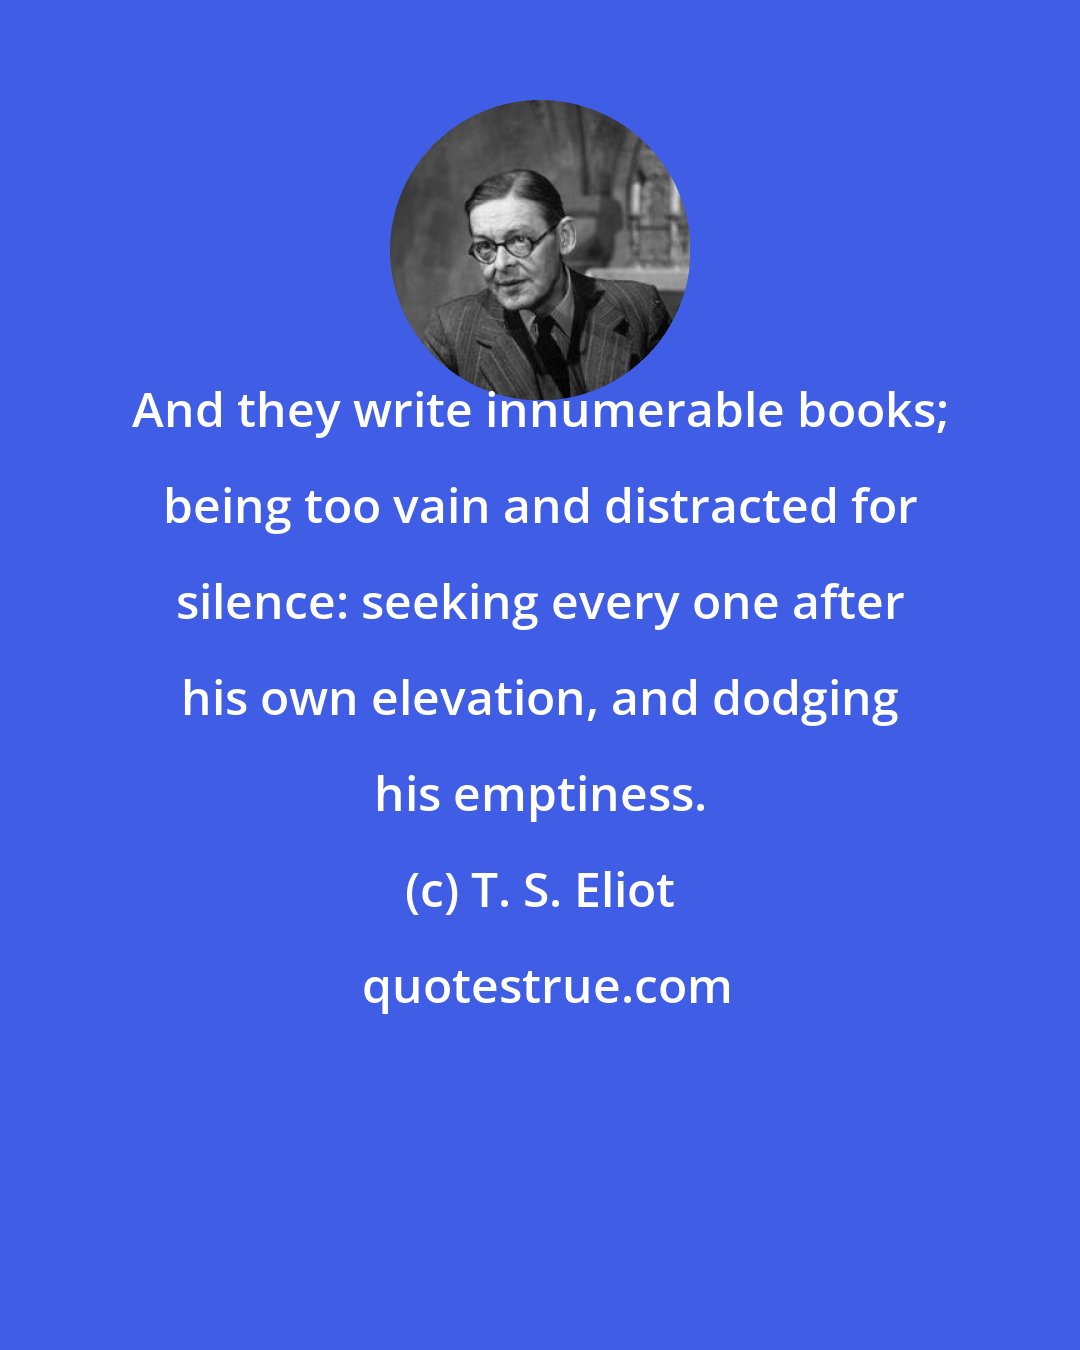 T. S. Eliot: And they write innumerable books; being too vain and distracted for silence: seeking every one after his own elevation, and dodging his emptiness.